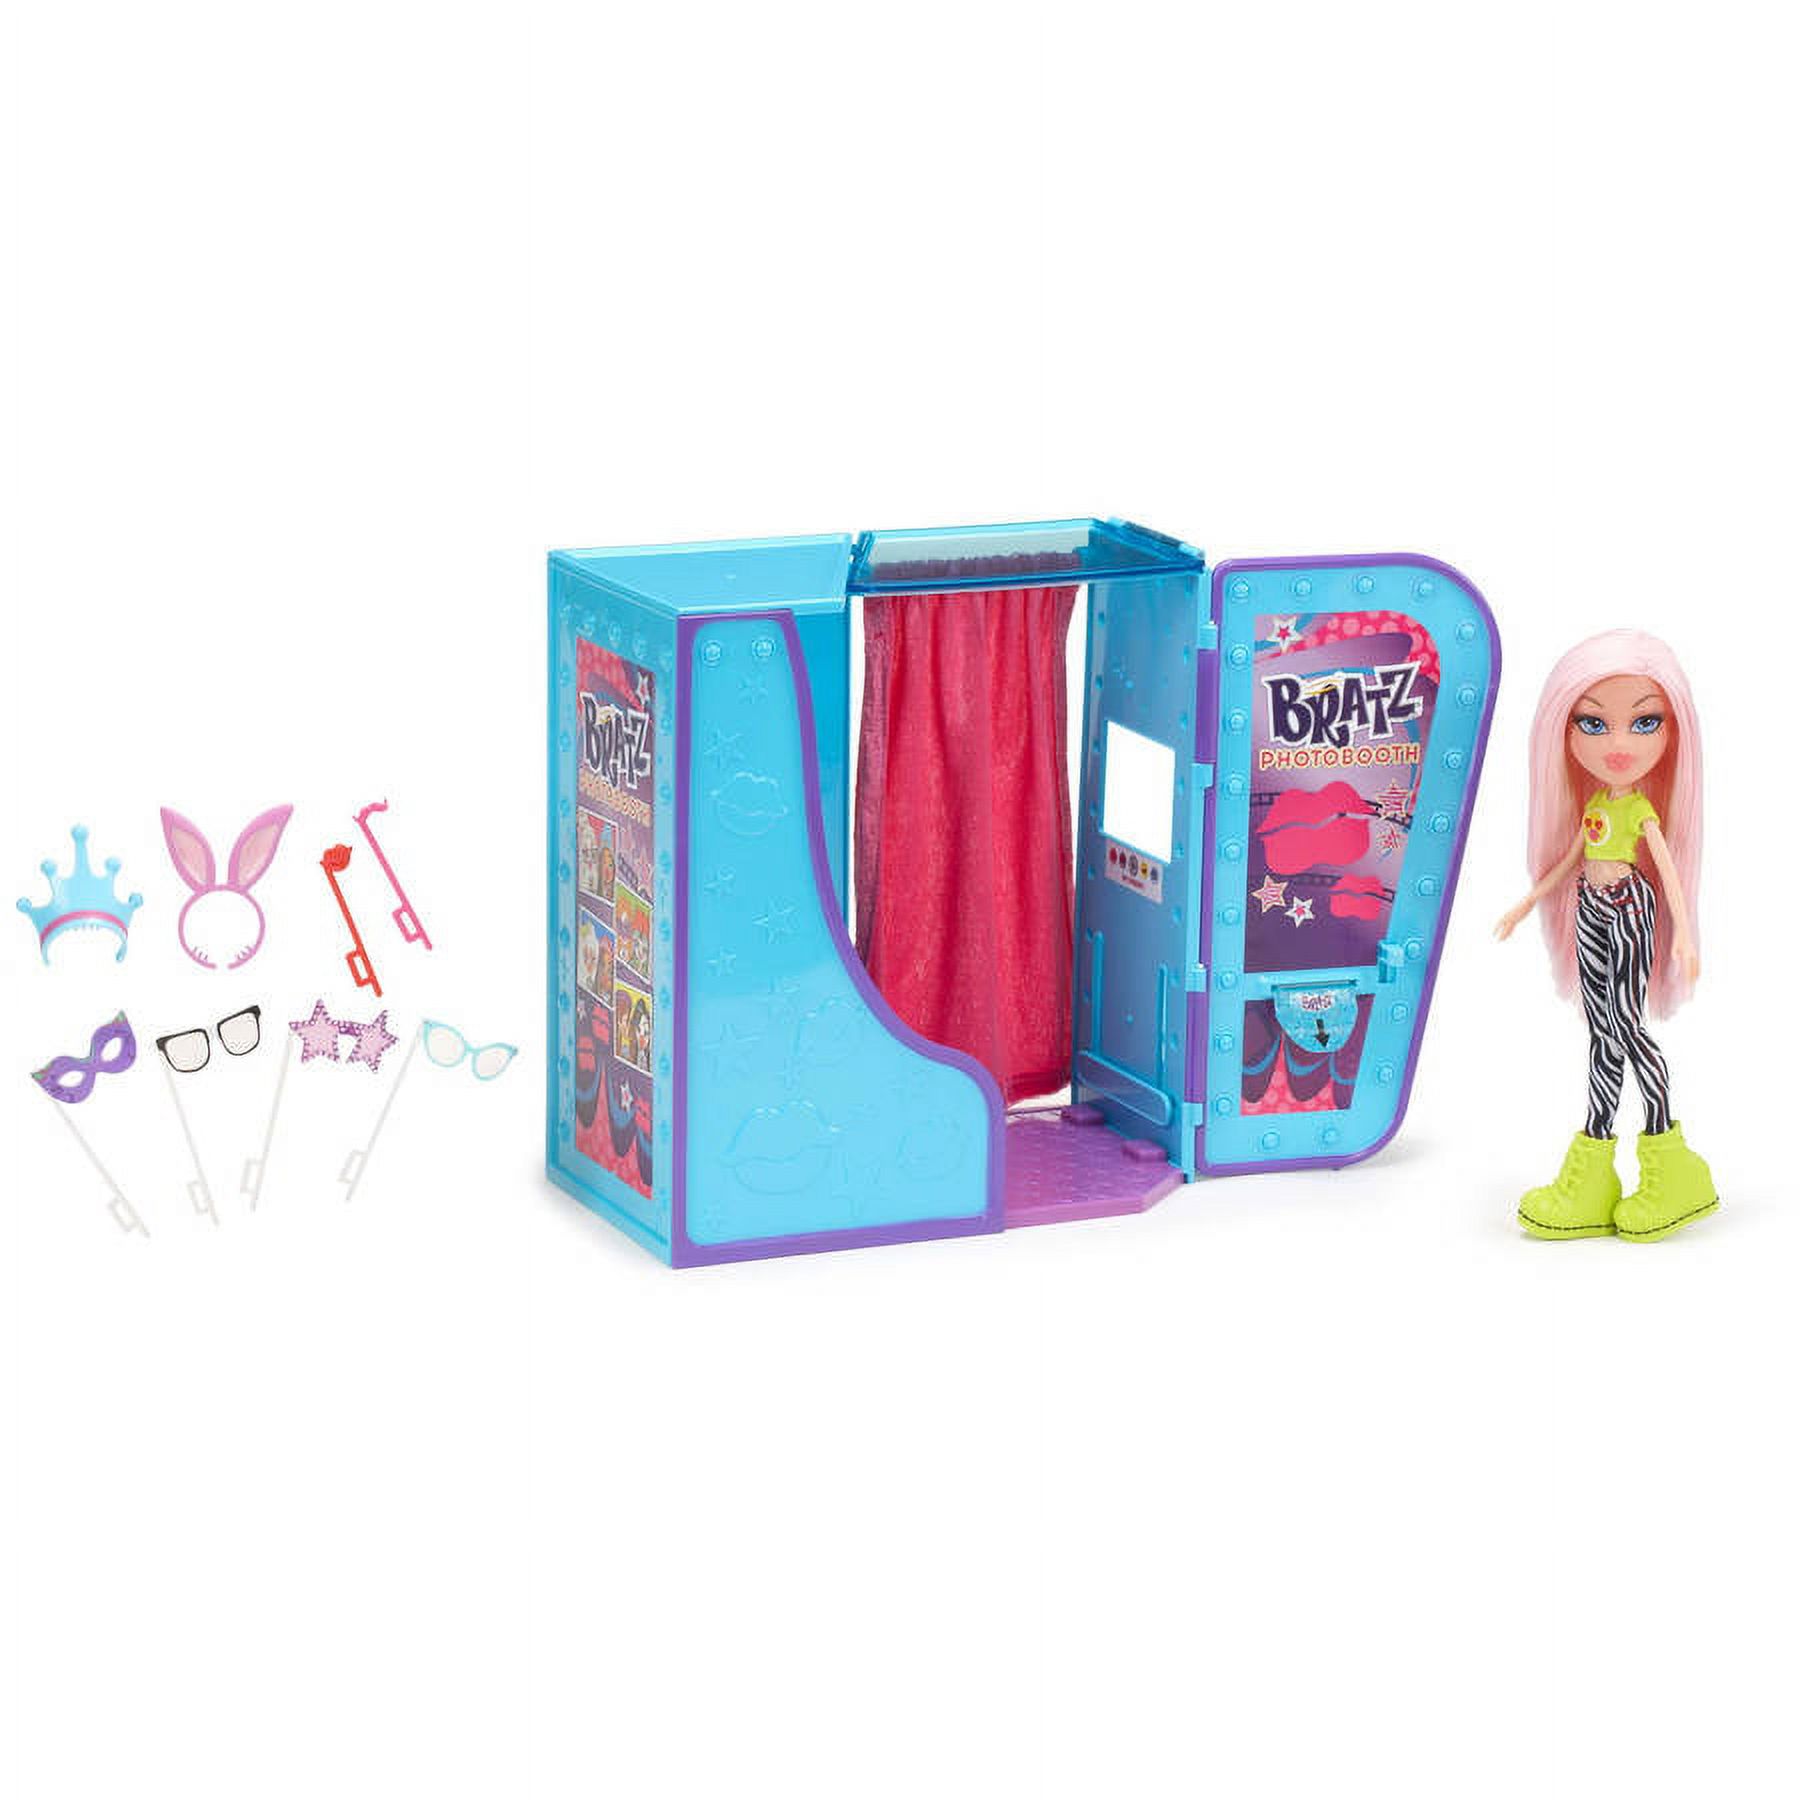 Bratz #SelfieSnaps Photobooth with Doll, Great Gift for Children Ages 6, 7, 8+ - image 2 of 5